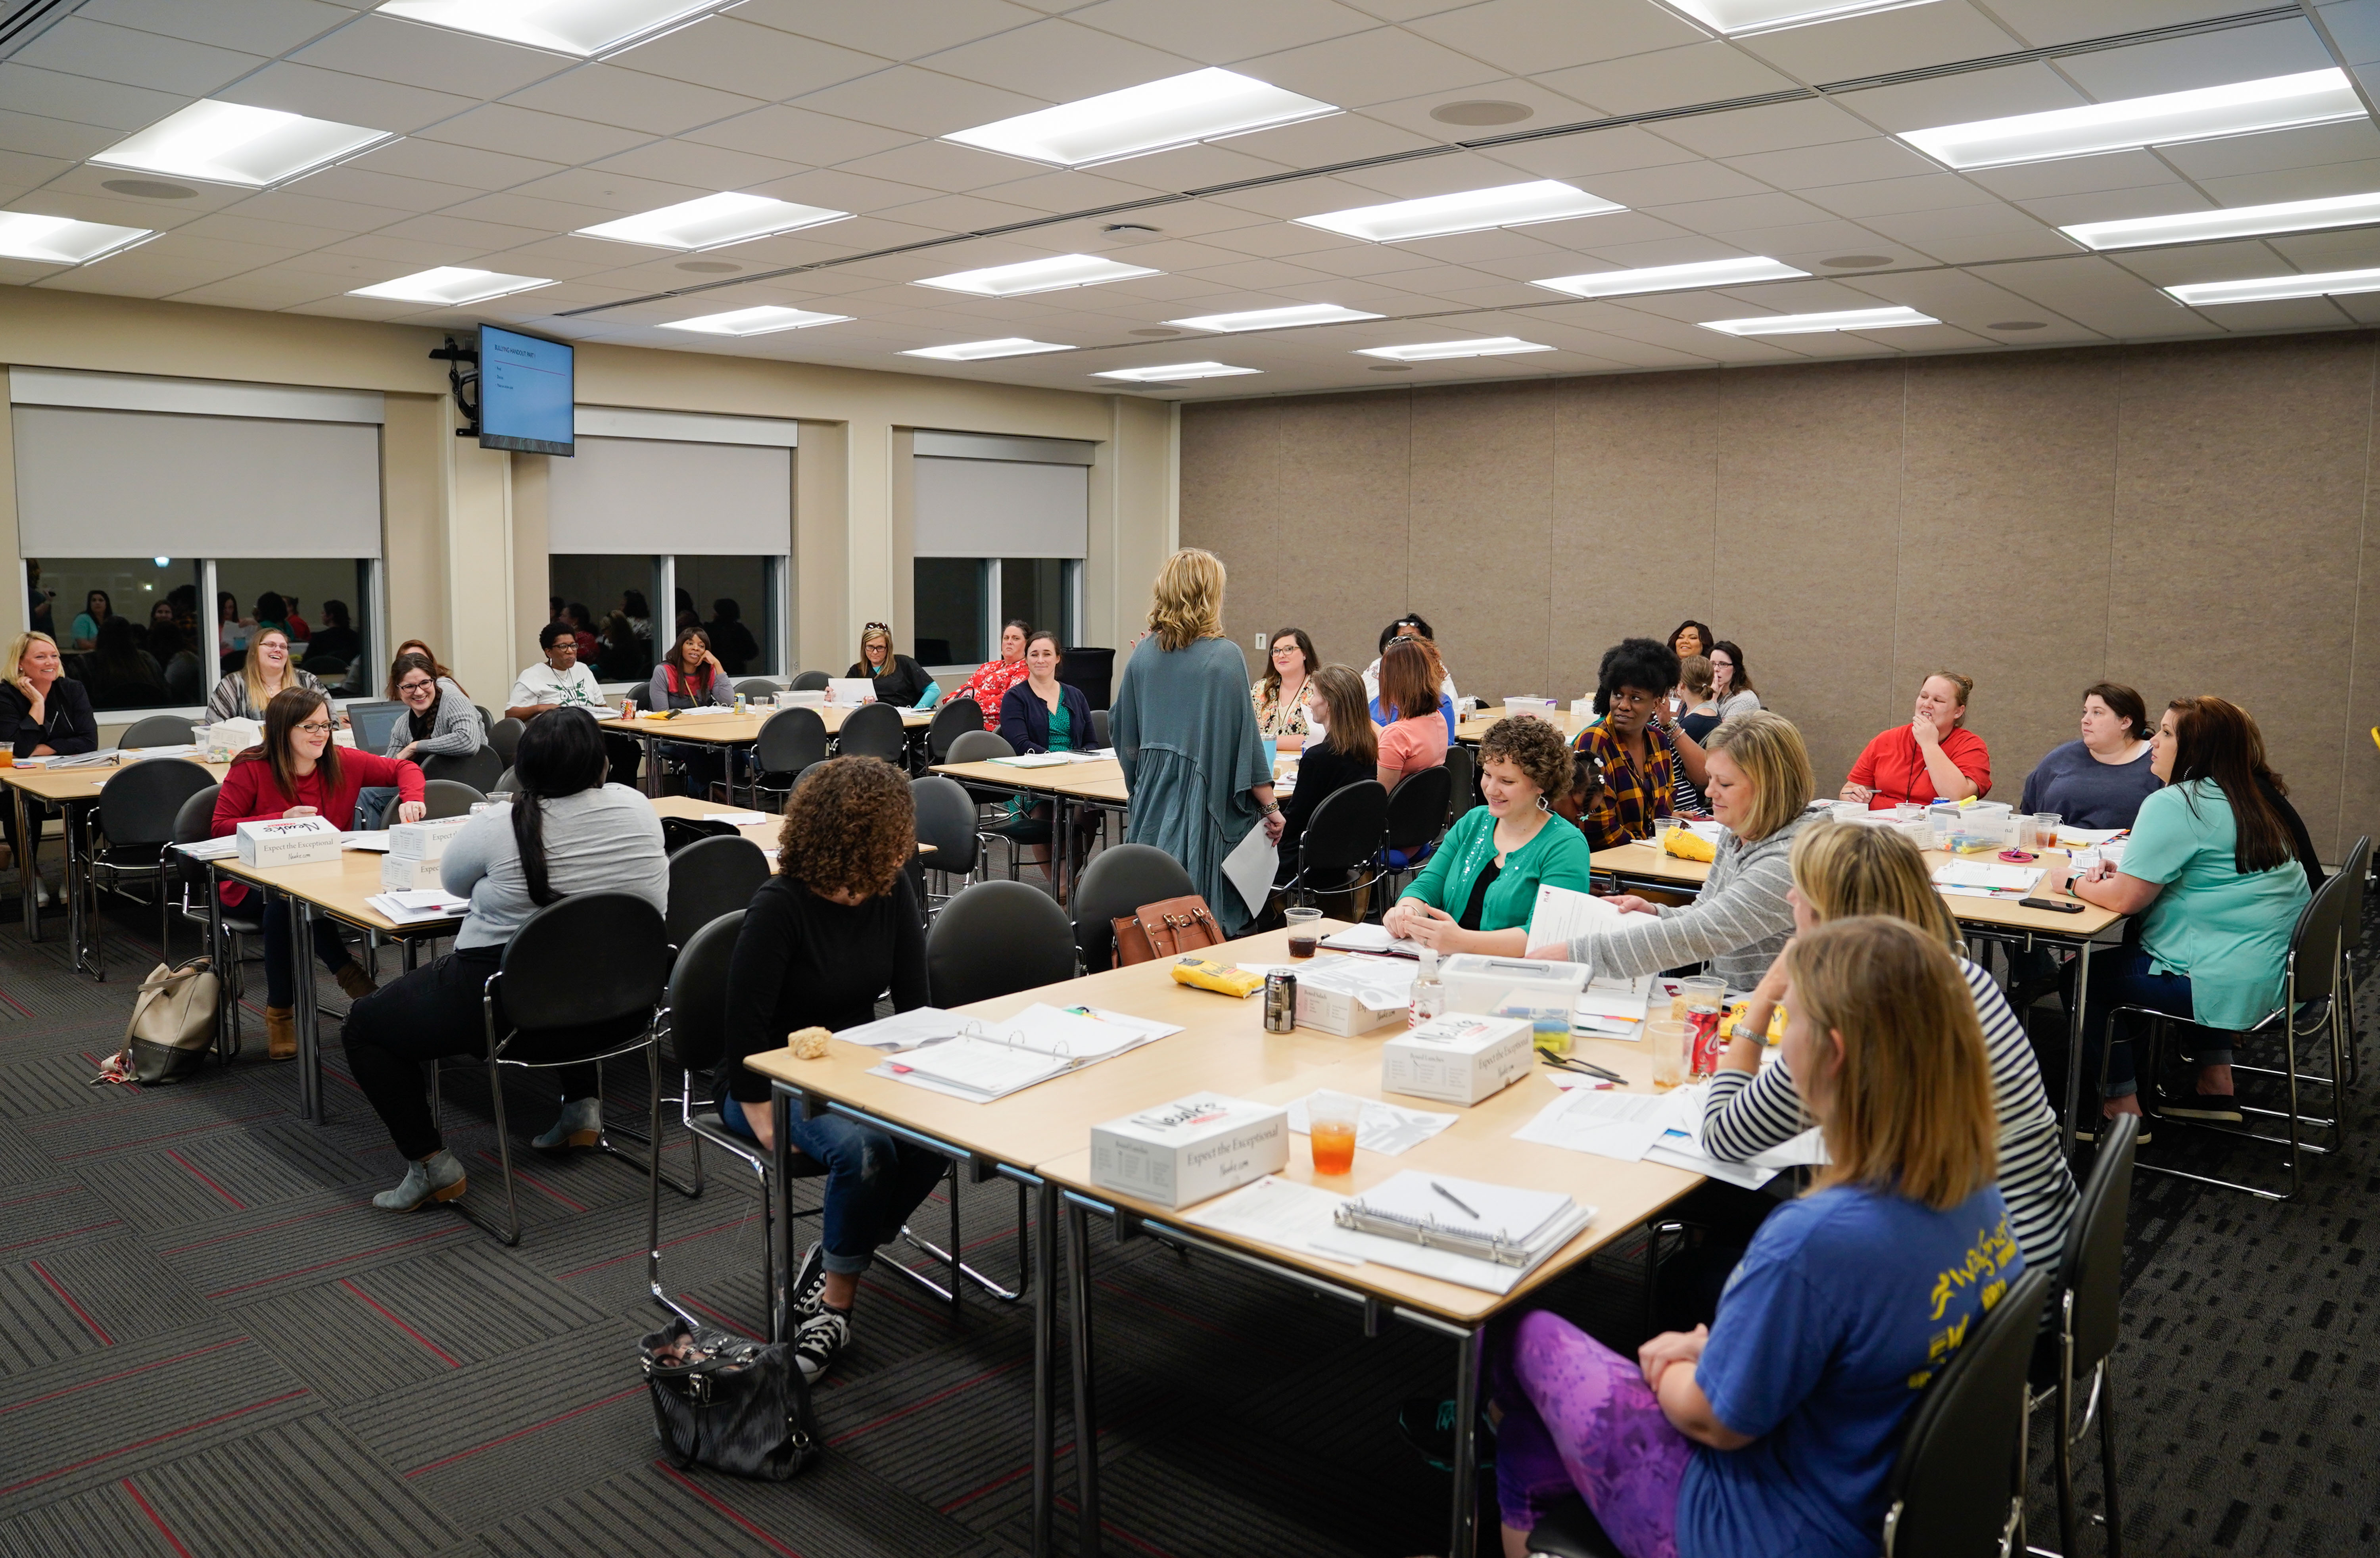 Elementary parents listen to DeAna Byrd, project coordinator for the Alabama Positive Behavior Support Office at The University of Alabama, who spoke on “Focusing on the Positive.”